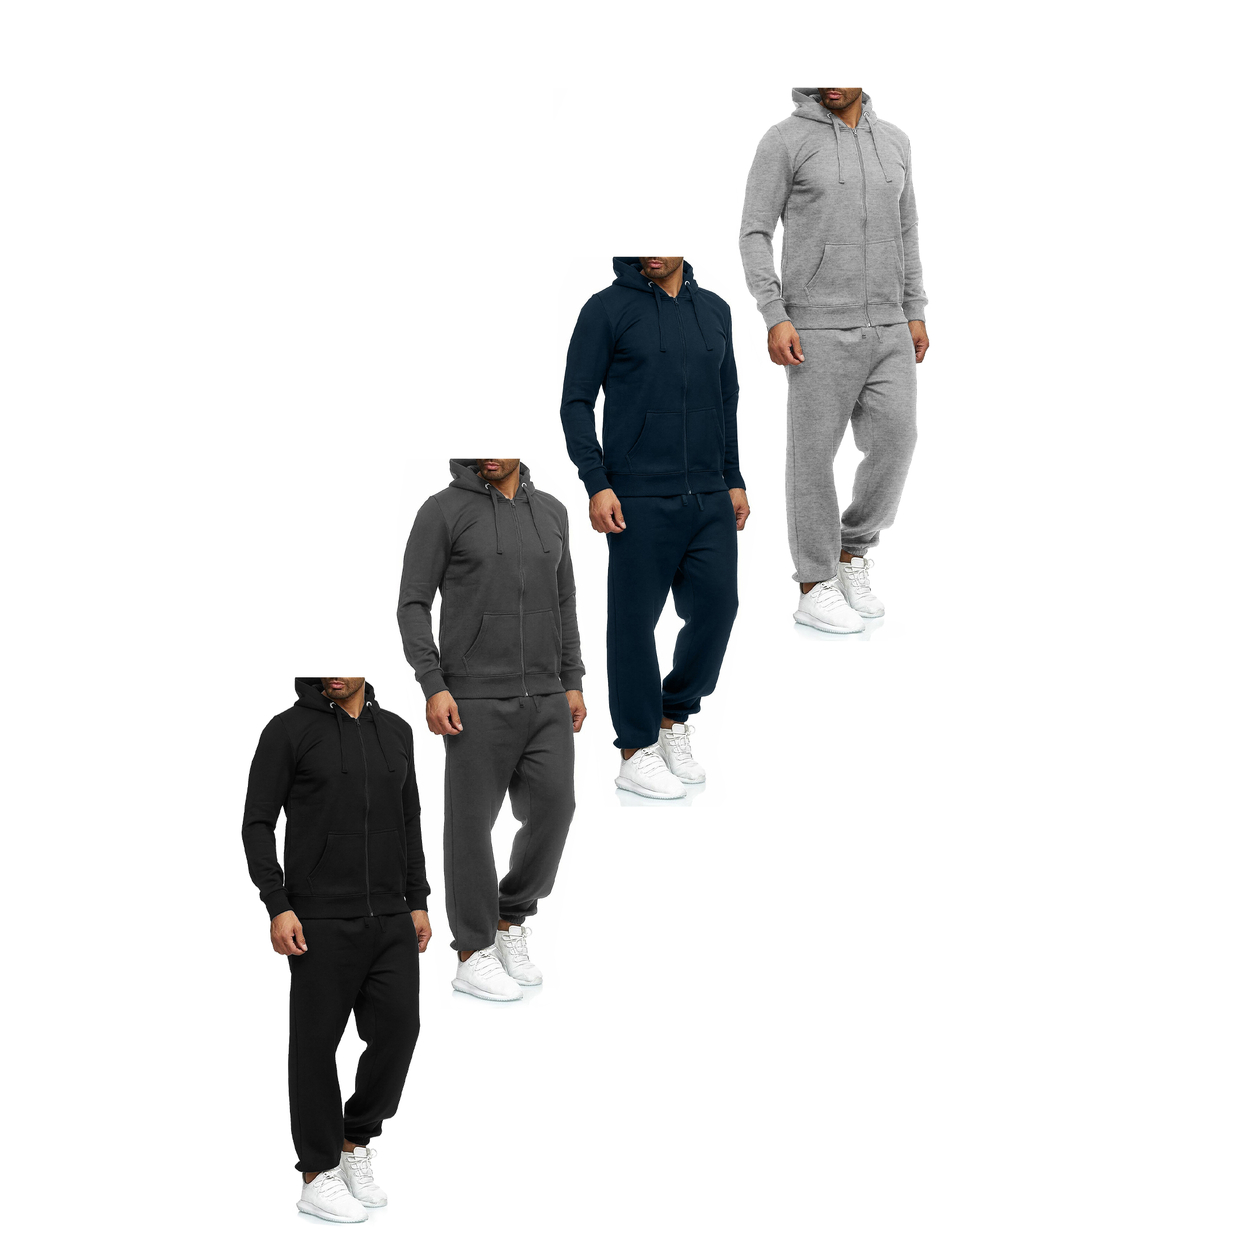 Multi-Pack: Men's Casual Big & Tall Athletic Active Winter Warm Fleece Lined Full Zip Tracksuit Jogger Set - Grey, 2-pack, Small